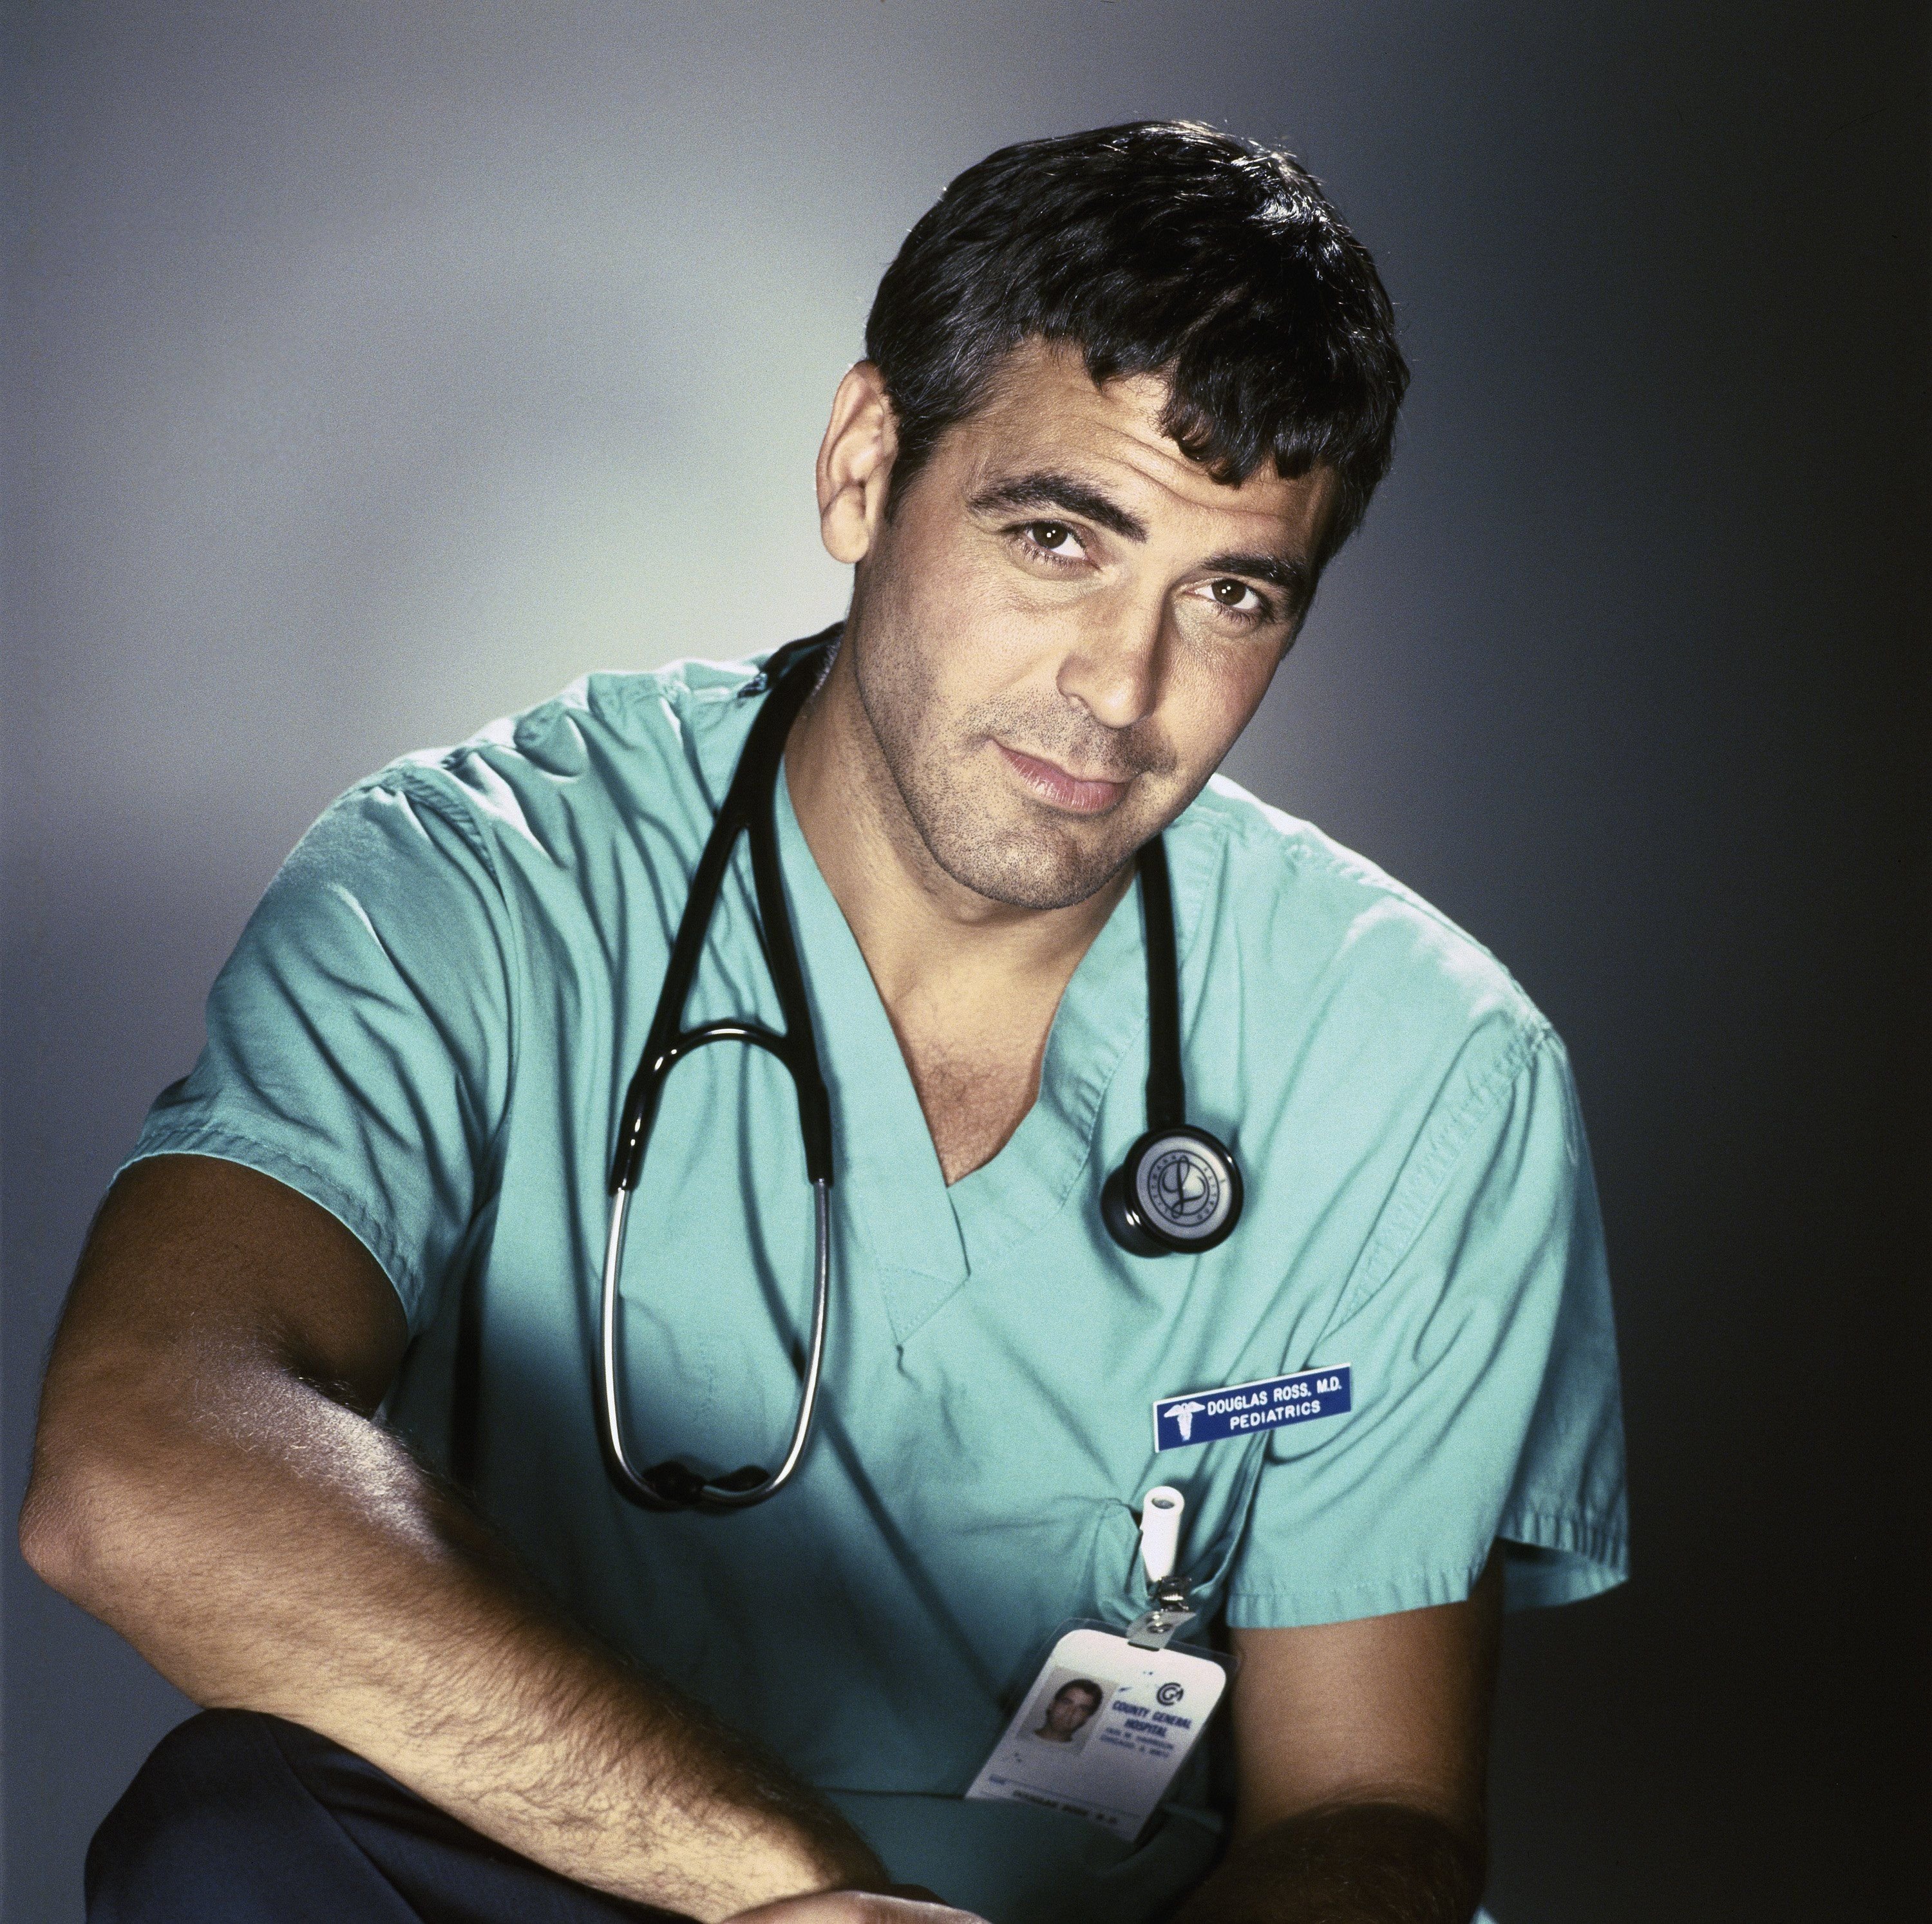 Portrait of George Clooney as Dr. Doug Ross of "ER - Season 2" on August 04, 2008 | Photo: Getty Images